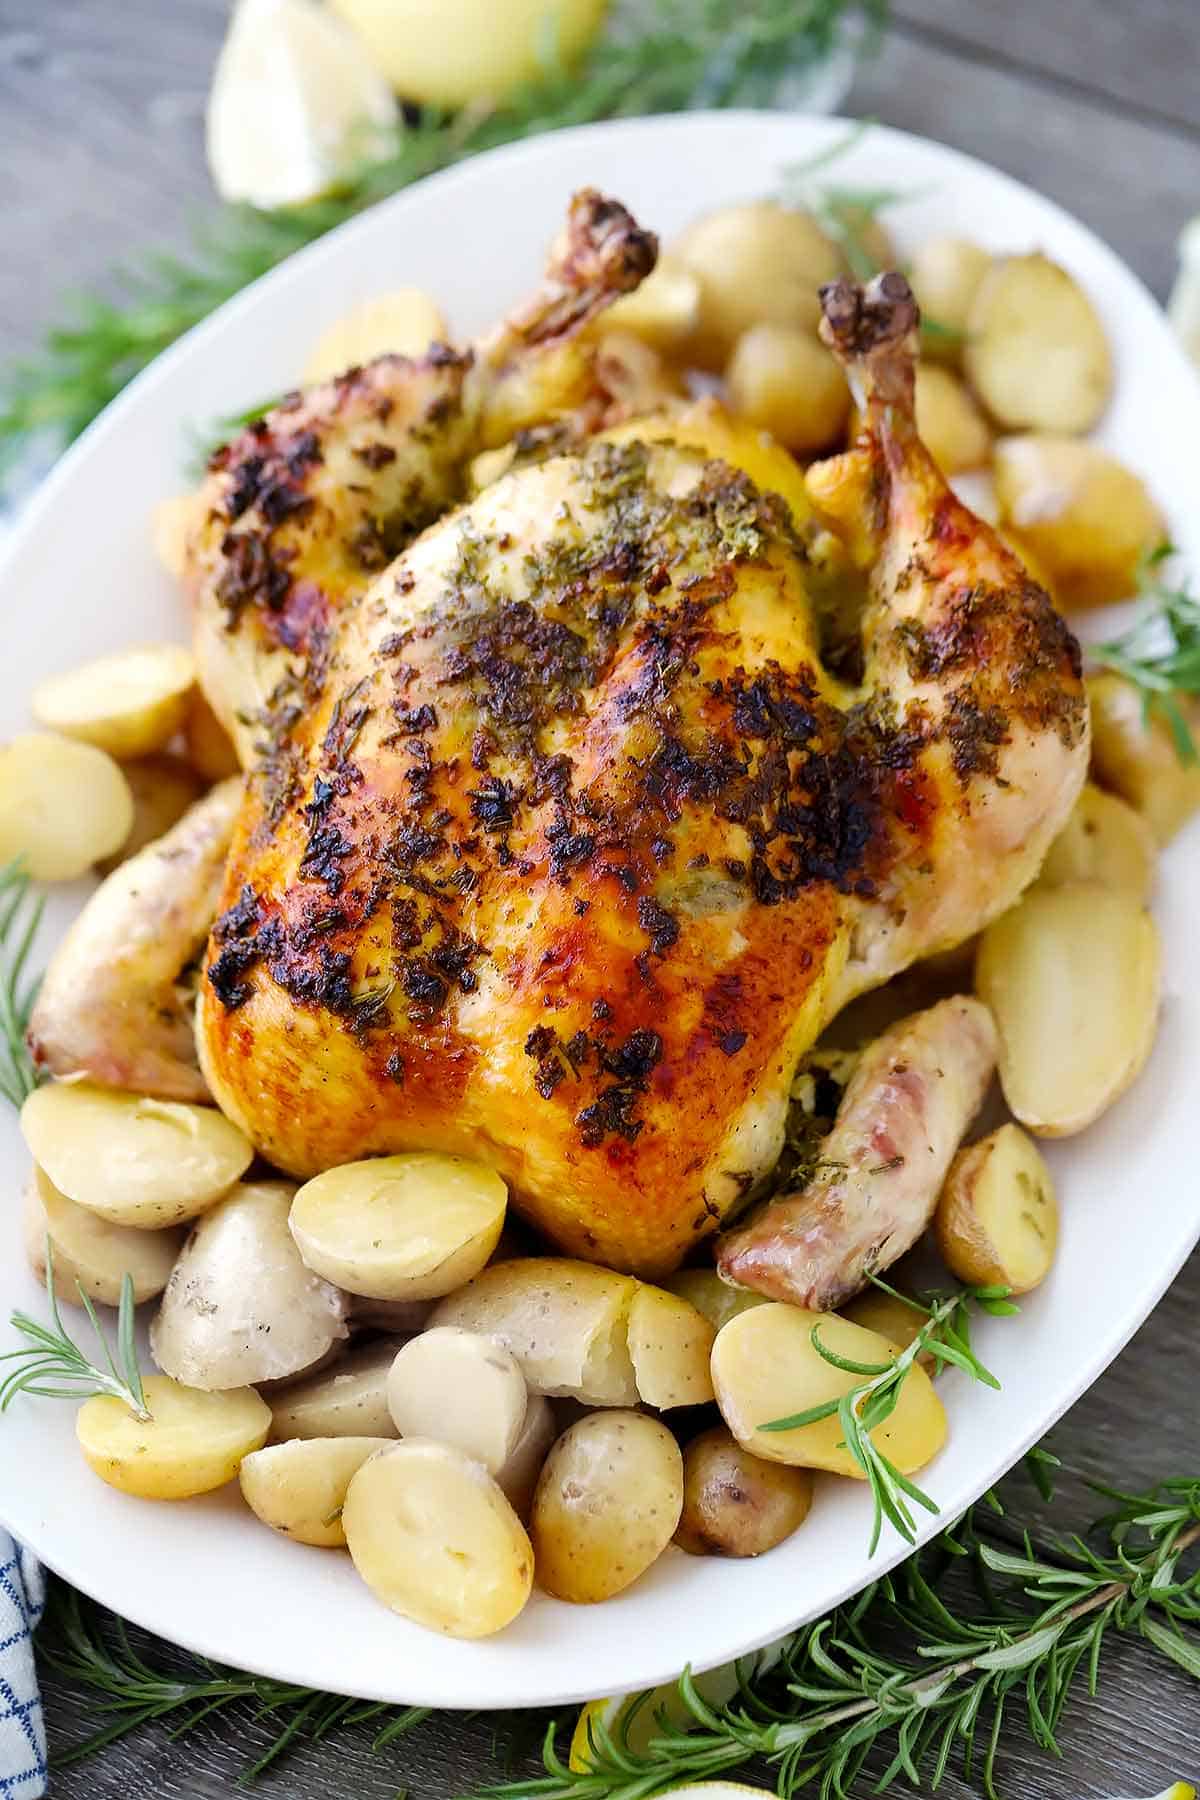 Whole roast chicken on a platter with potatoes.